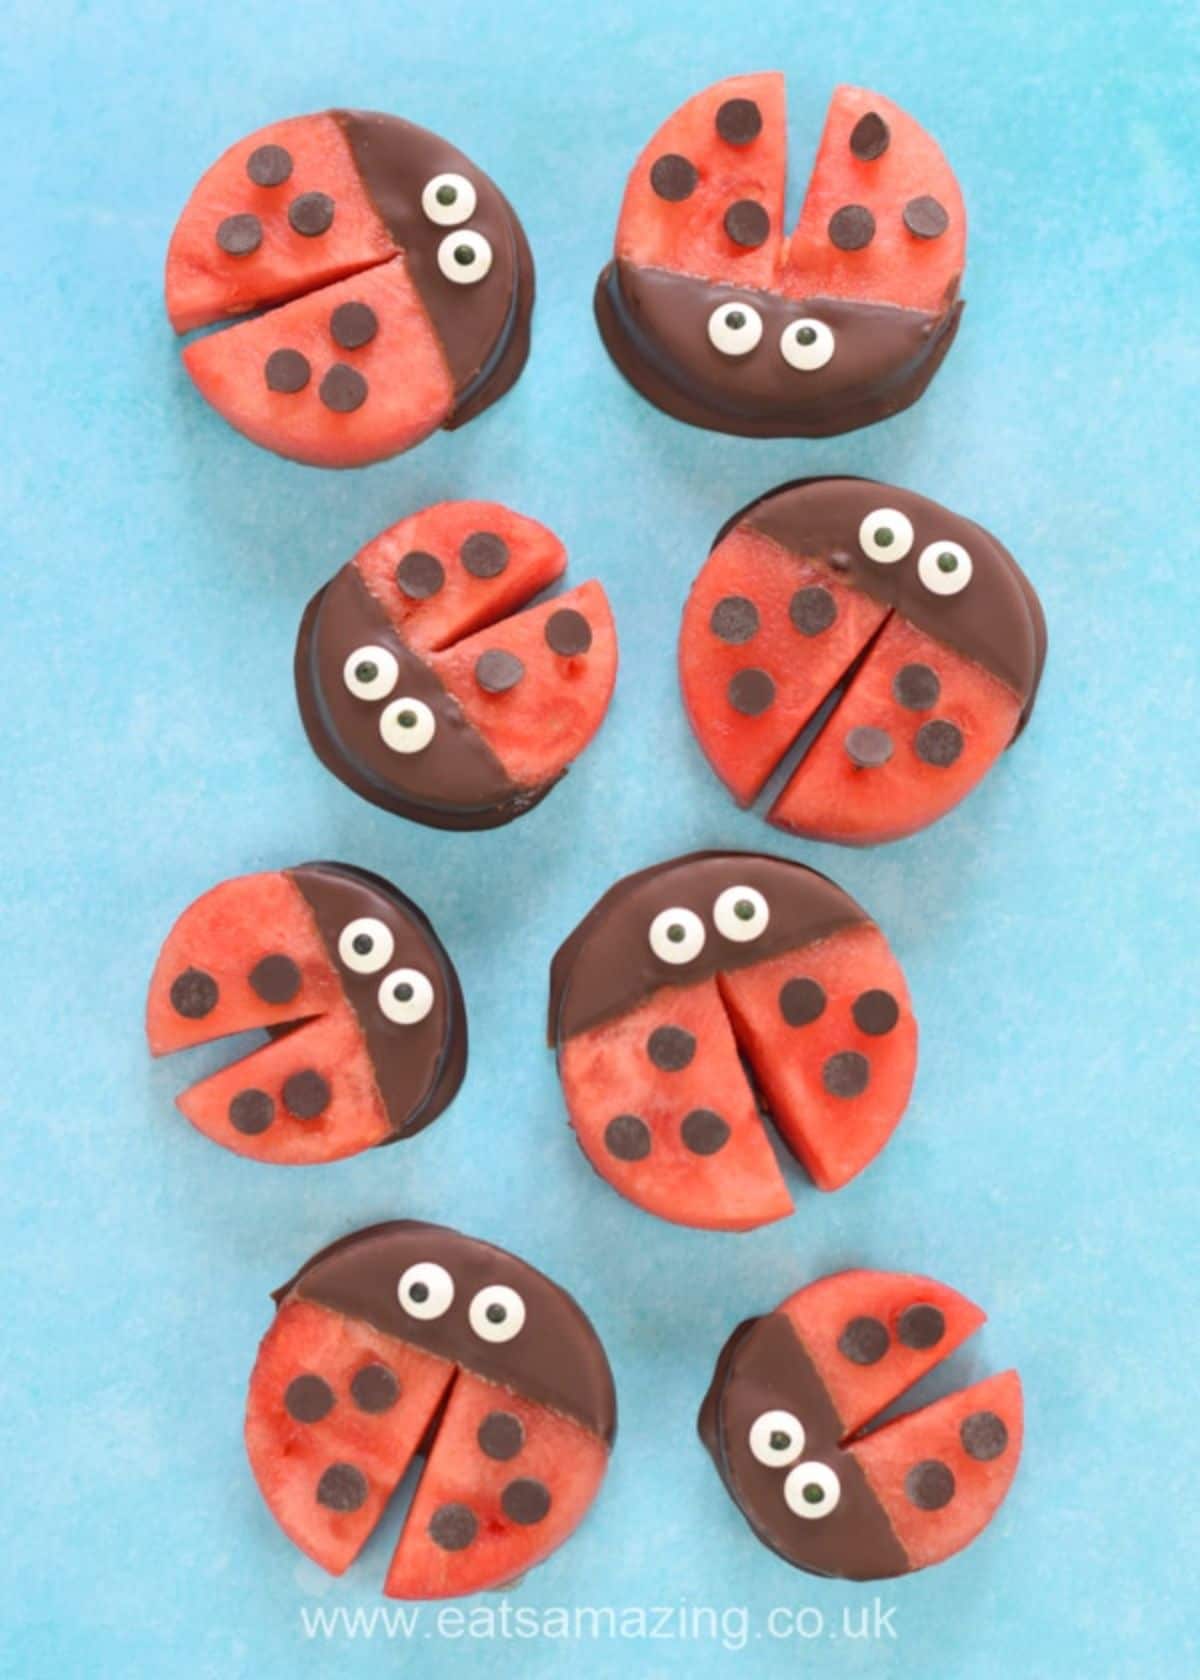 8 small ladybirds made of watermelon slices and chocolate